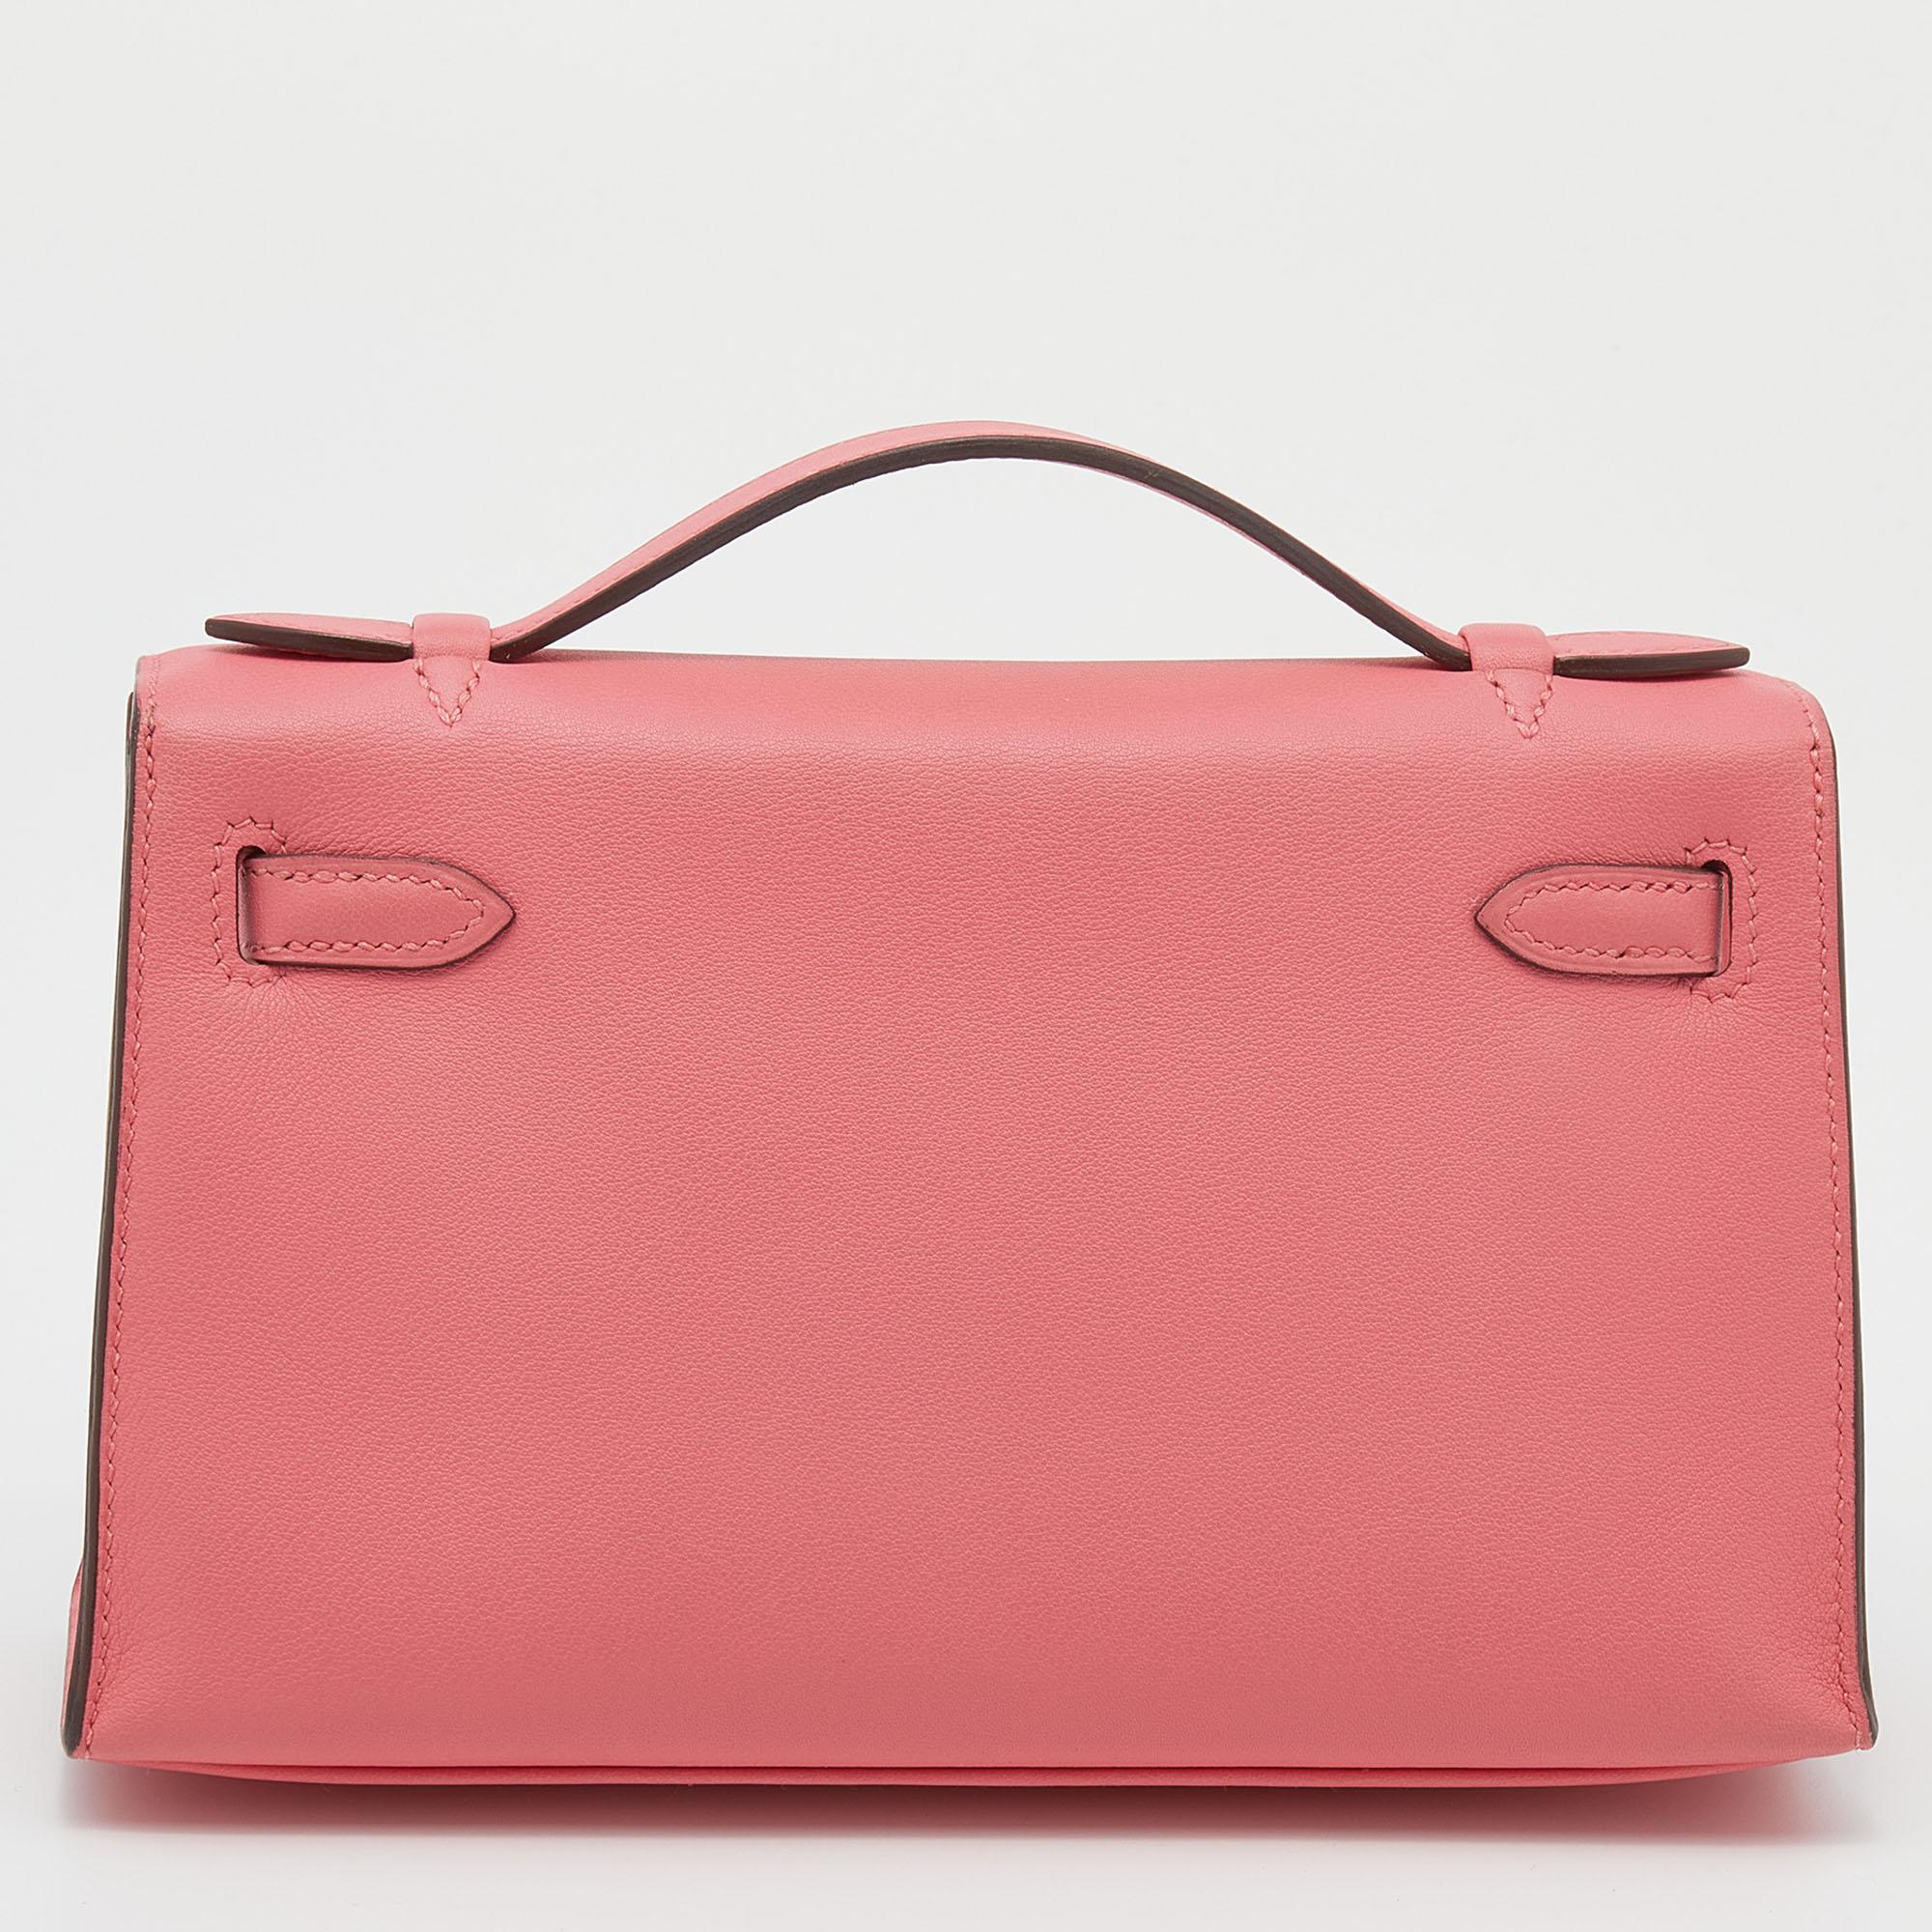 This Kelly Pochette is a delighting find. Named and inspired by the world-famous Kelly bag, this wondrous work of art is presented in Rose Lipstick Swift leather and secured by the iconic Kelly lock. Its flap opens to reveal a well-sized leather